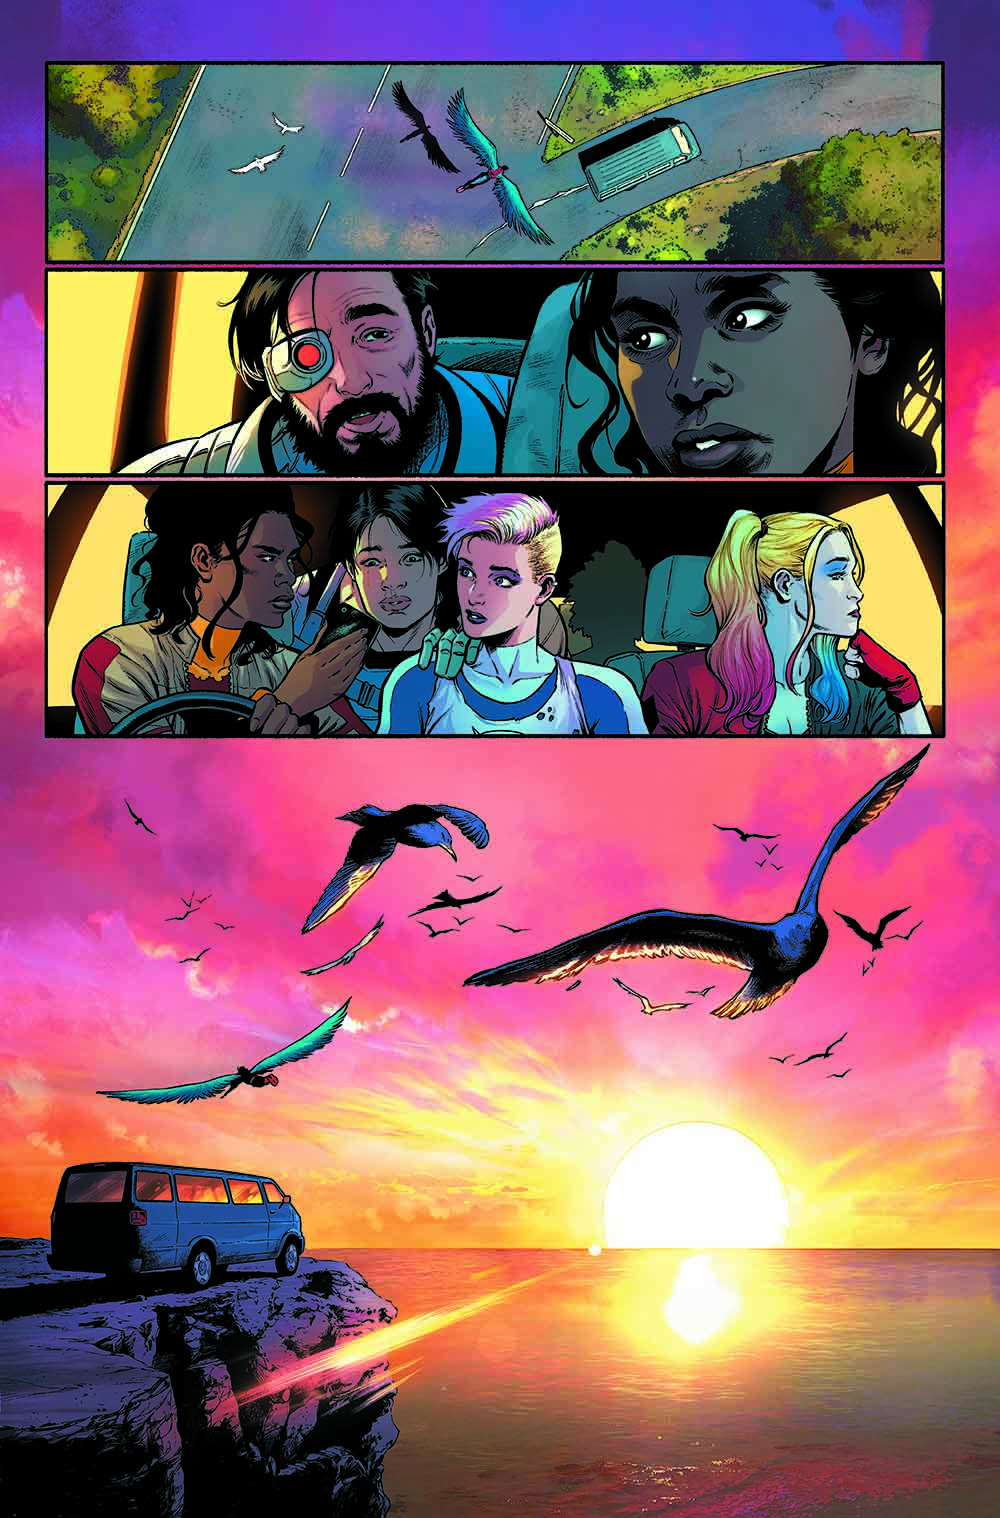 In a comic book page a winged creature flies above car, people sit in car and van perches on seaside cliff during sunset.